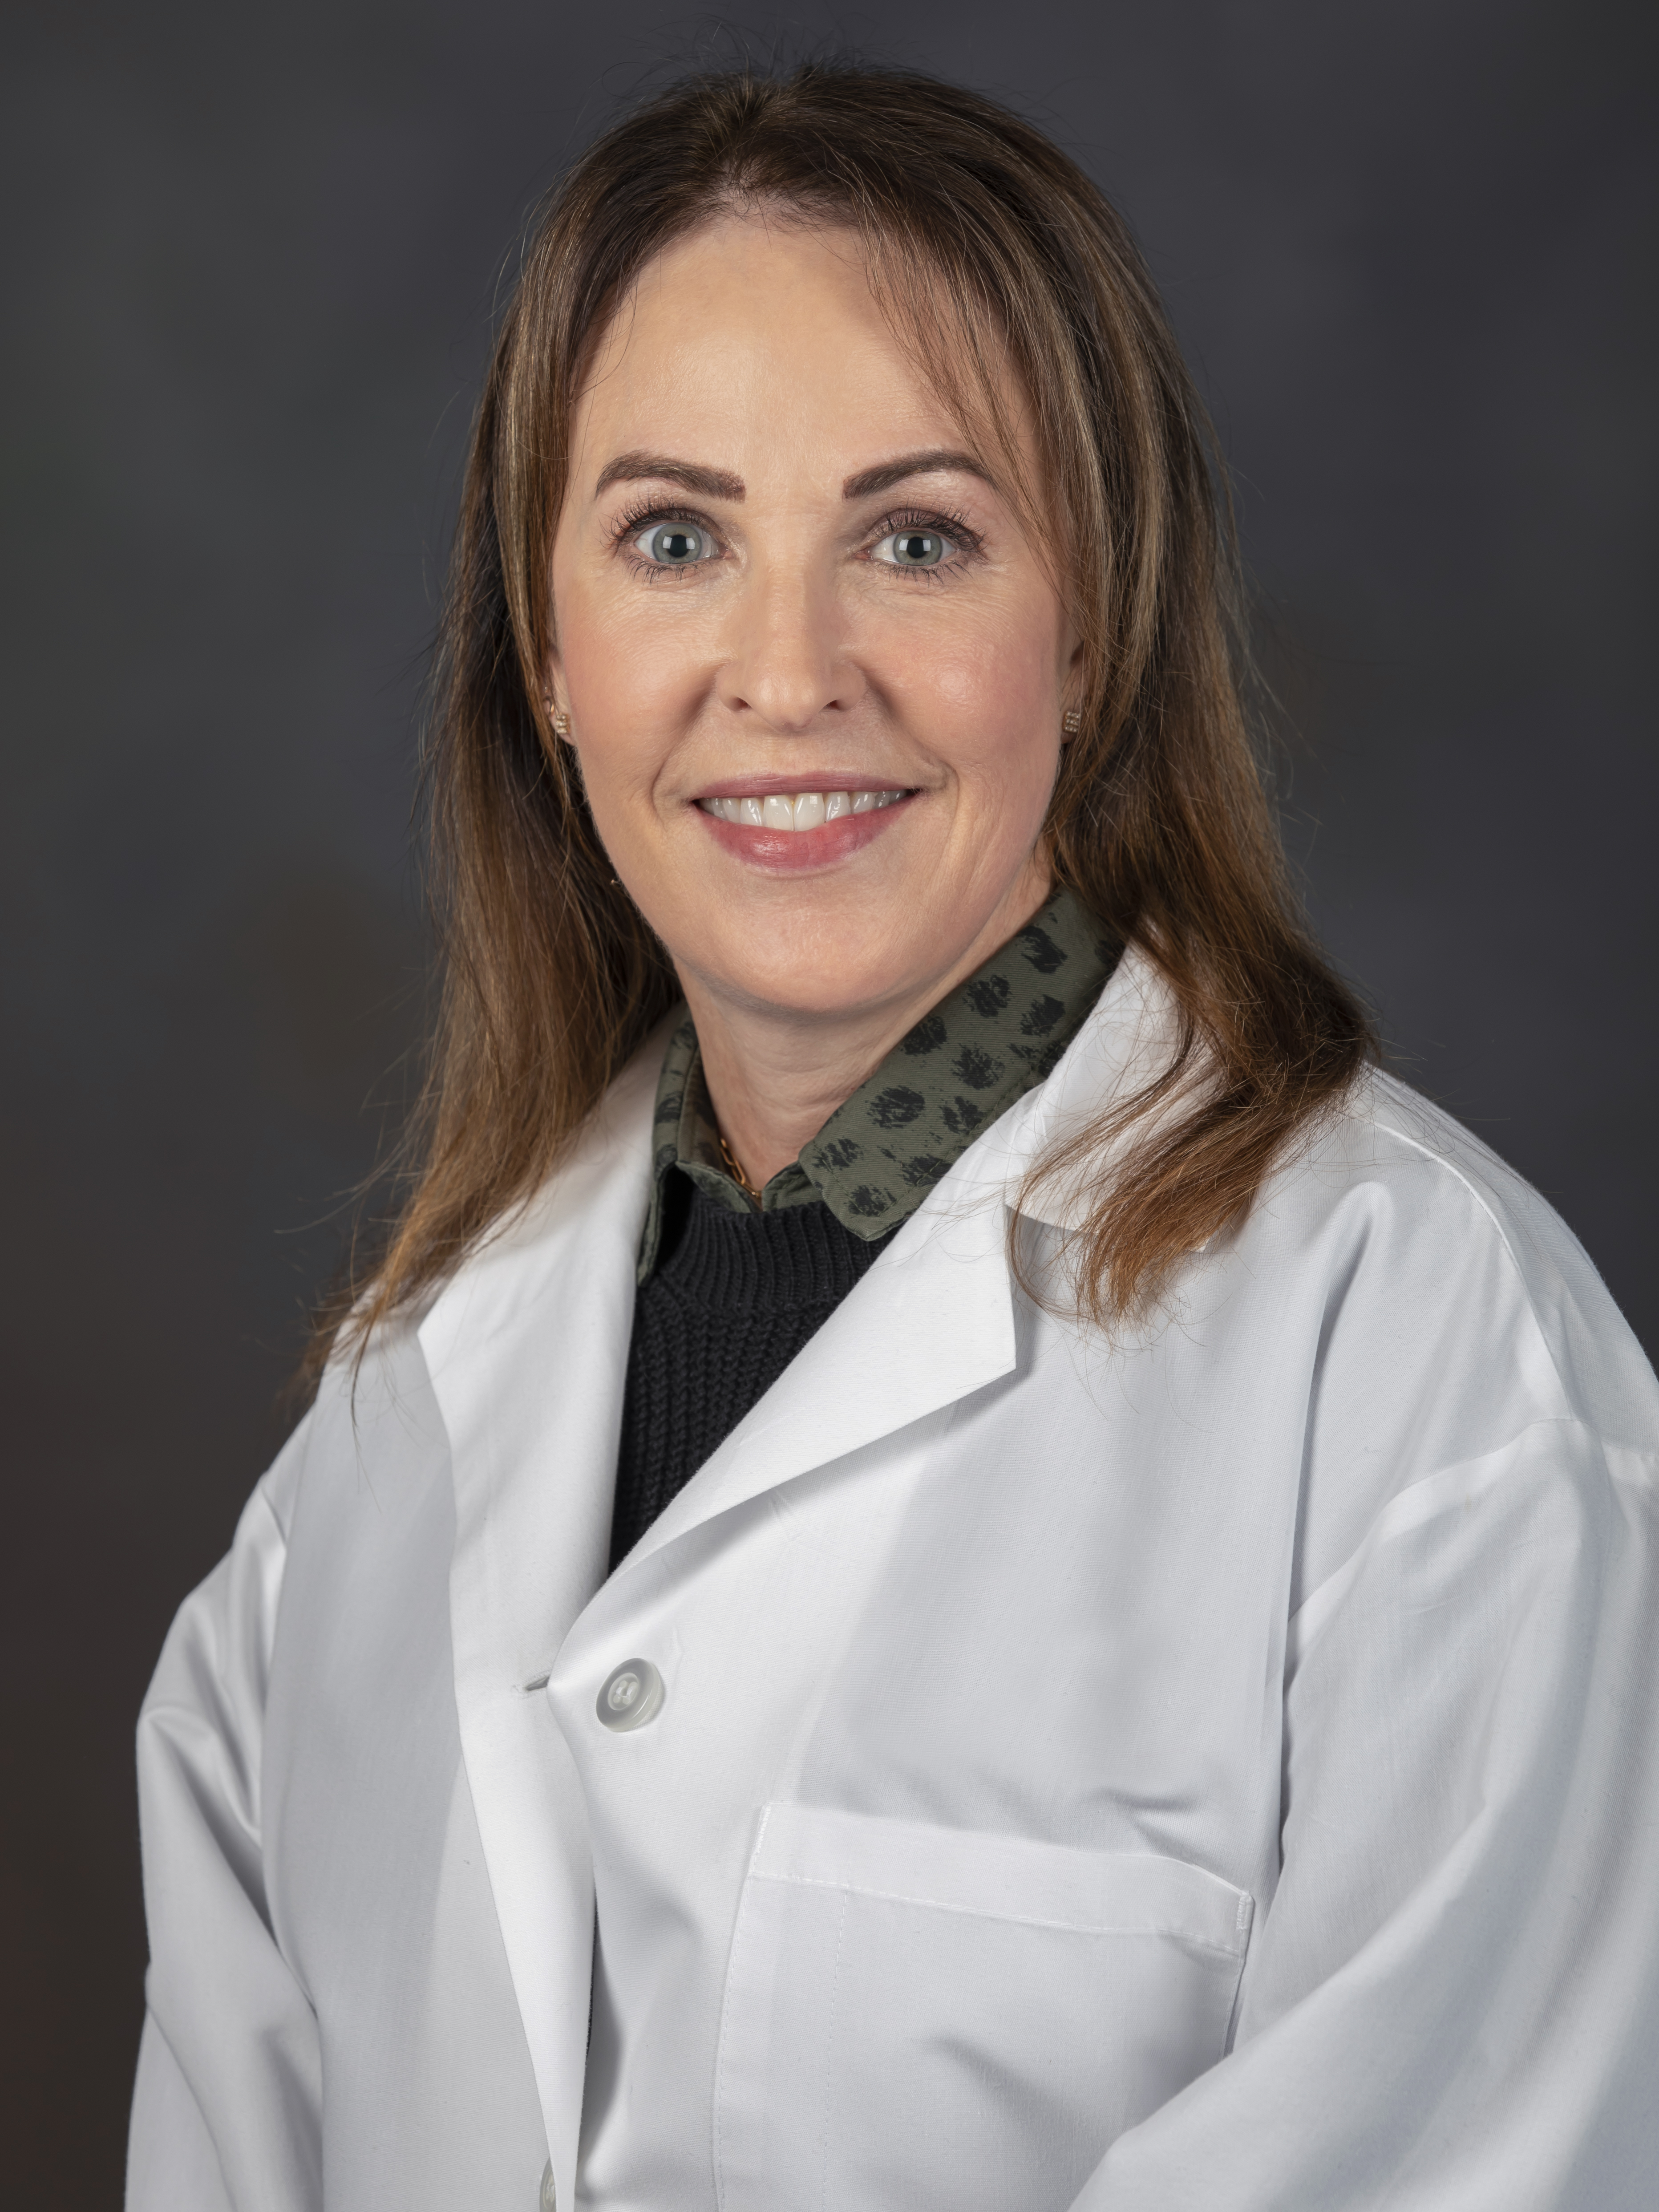 Cynthia A. Woerz, M.D., Director of Anesthesiology, Medical Director of Acute Pain Management at Scottish Rite for Children